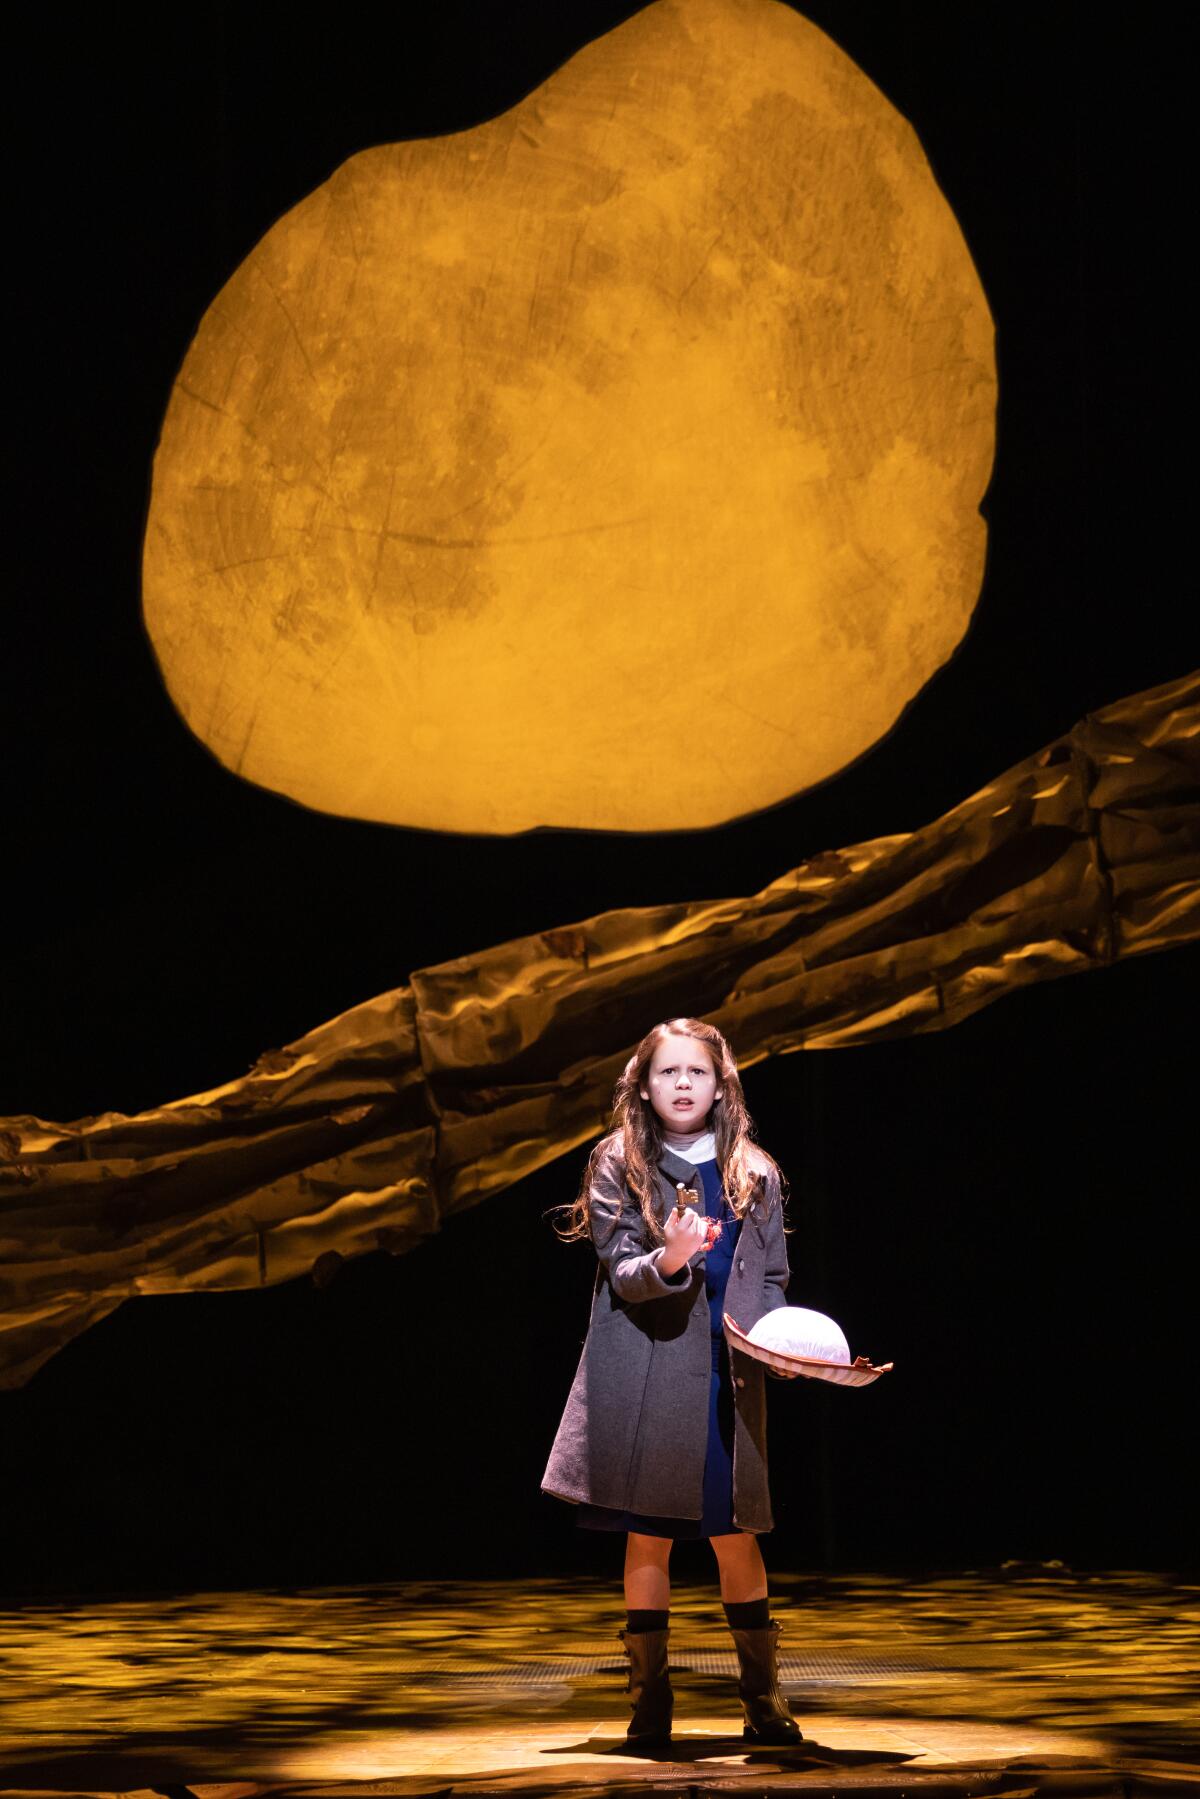 A young actor on a stage with a full moon behind her.